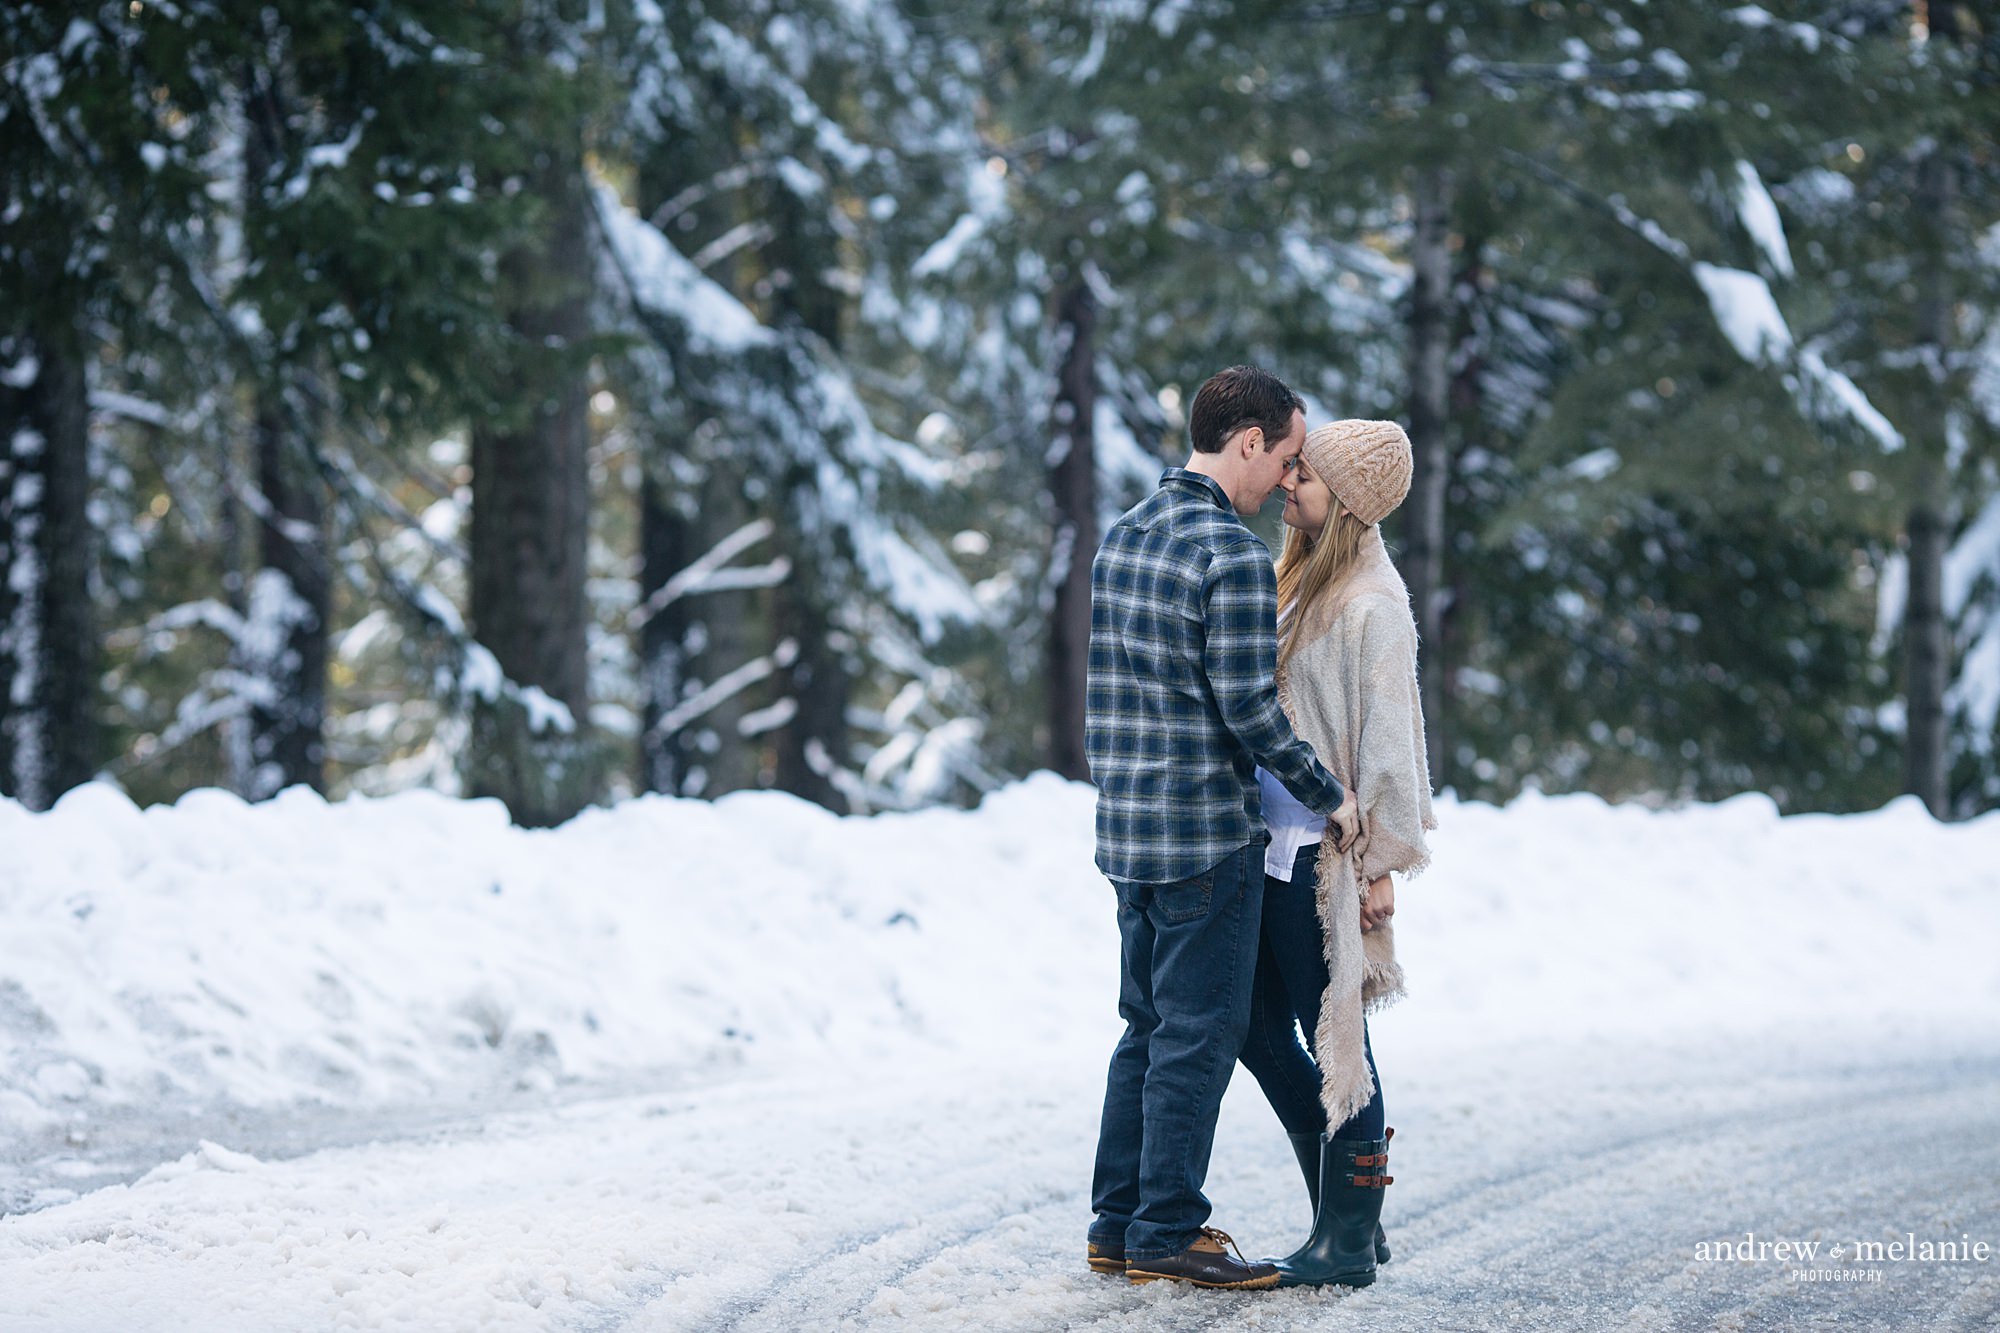 Andrew and Melanie Photography engagement session highlights Nevada City, CA